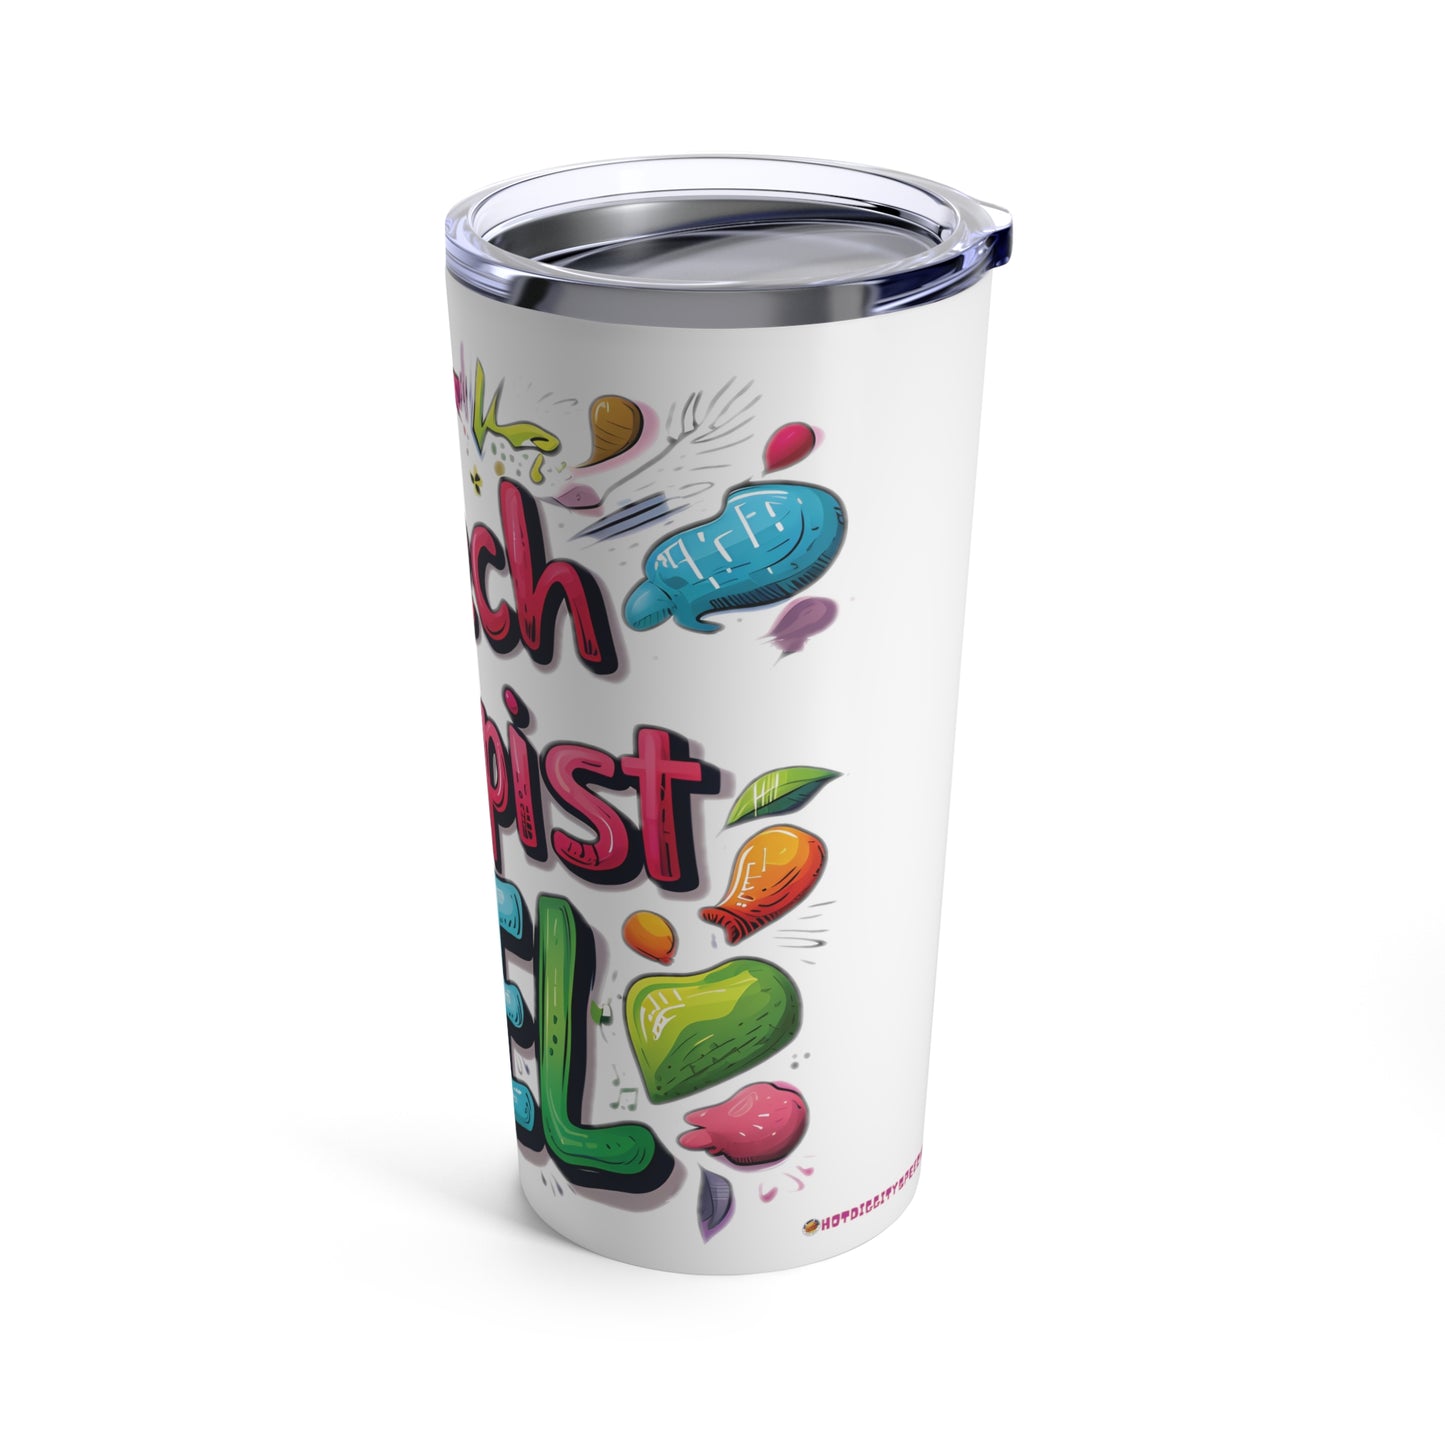 "Speech Therapist Fuel" 20oz Stainless Steel Tumbler - Colorful & Vacuum-Insulated with Clear Lid